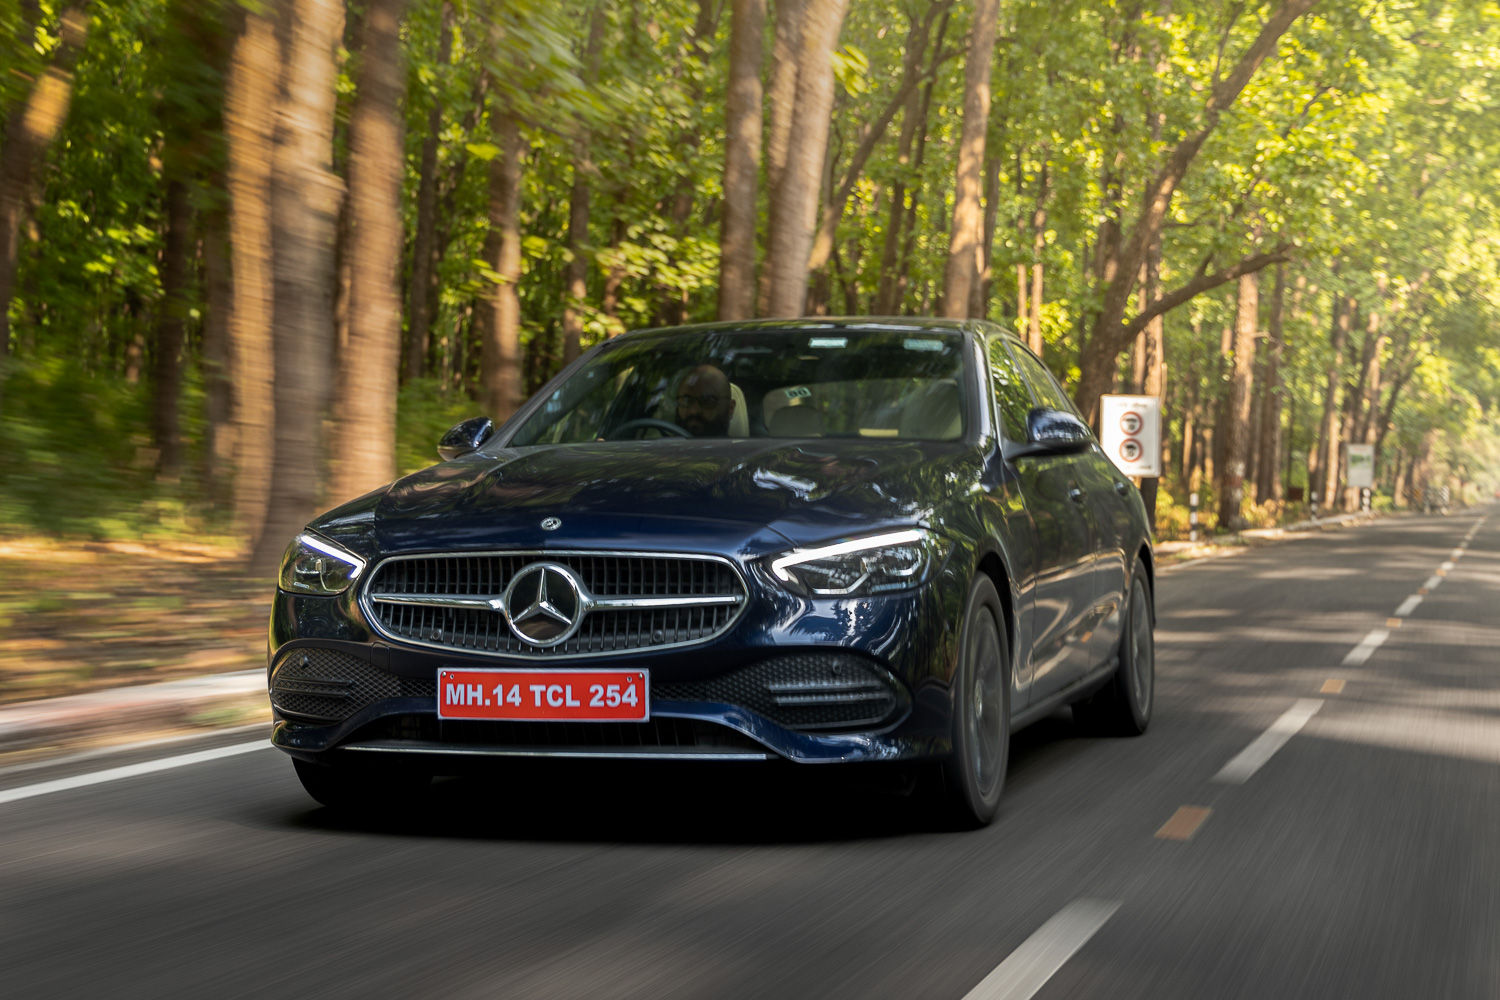 1 Mercedes-Benz C-Class Road Test Reviews from Experts